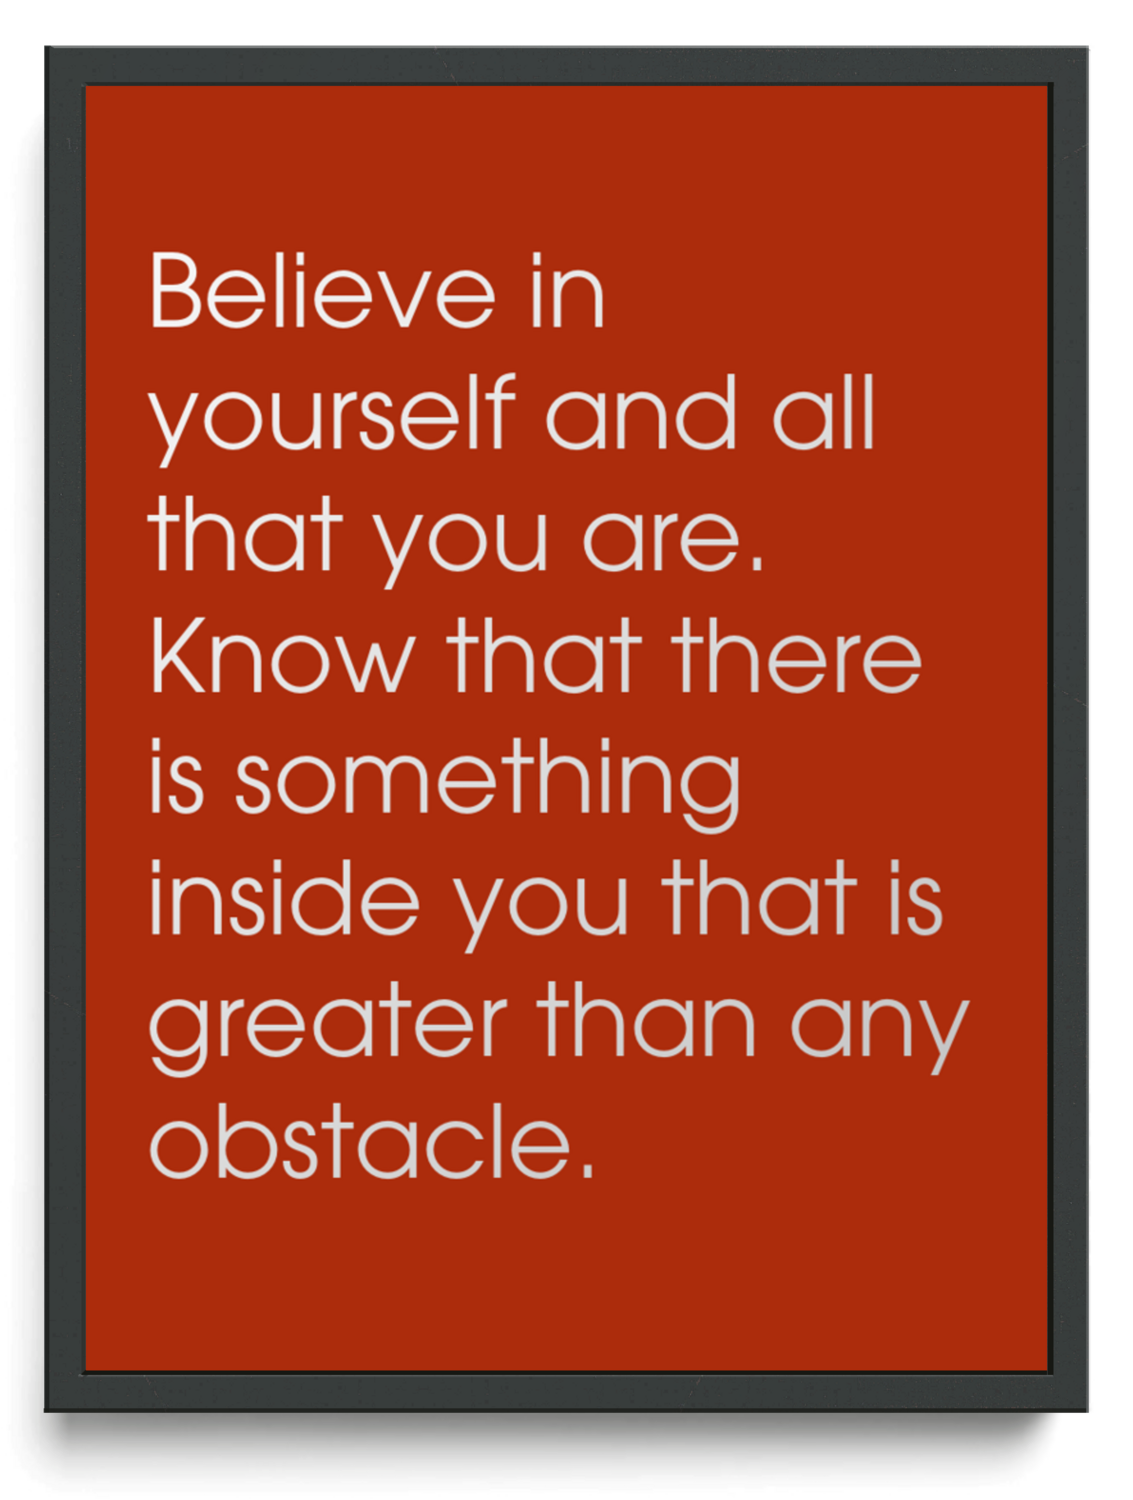 Believe in yourself and all that you are. Know that there is something inside you that is greater than any obstacle. framed typographic print